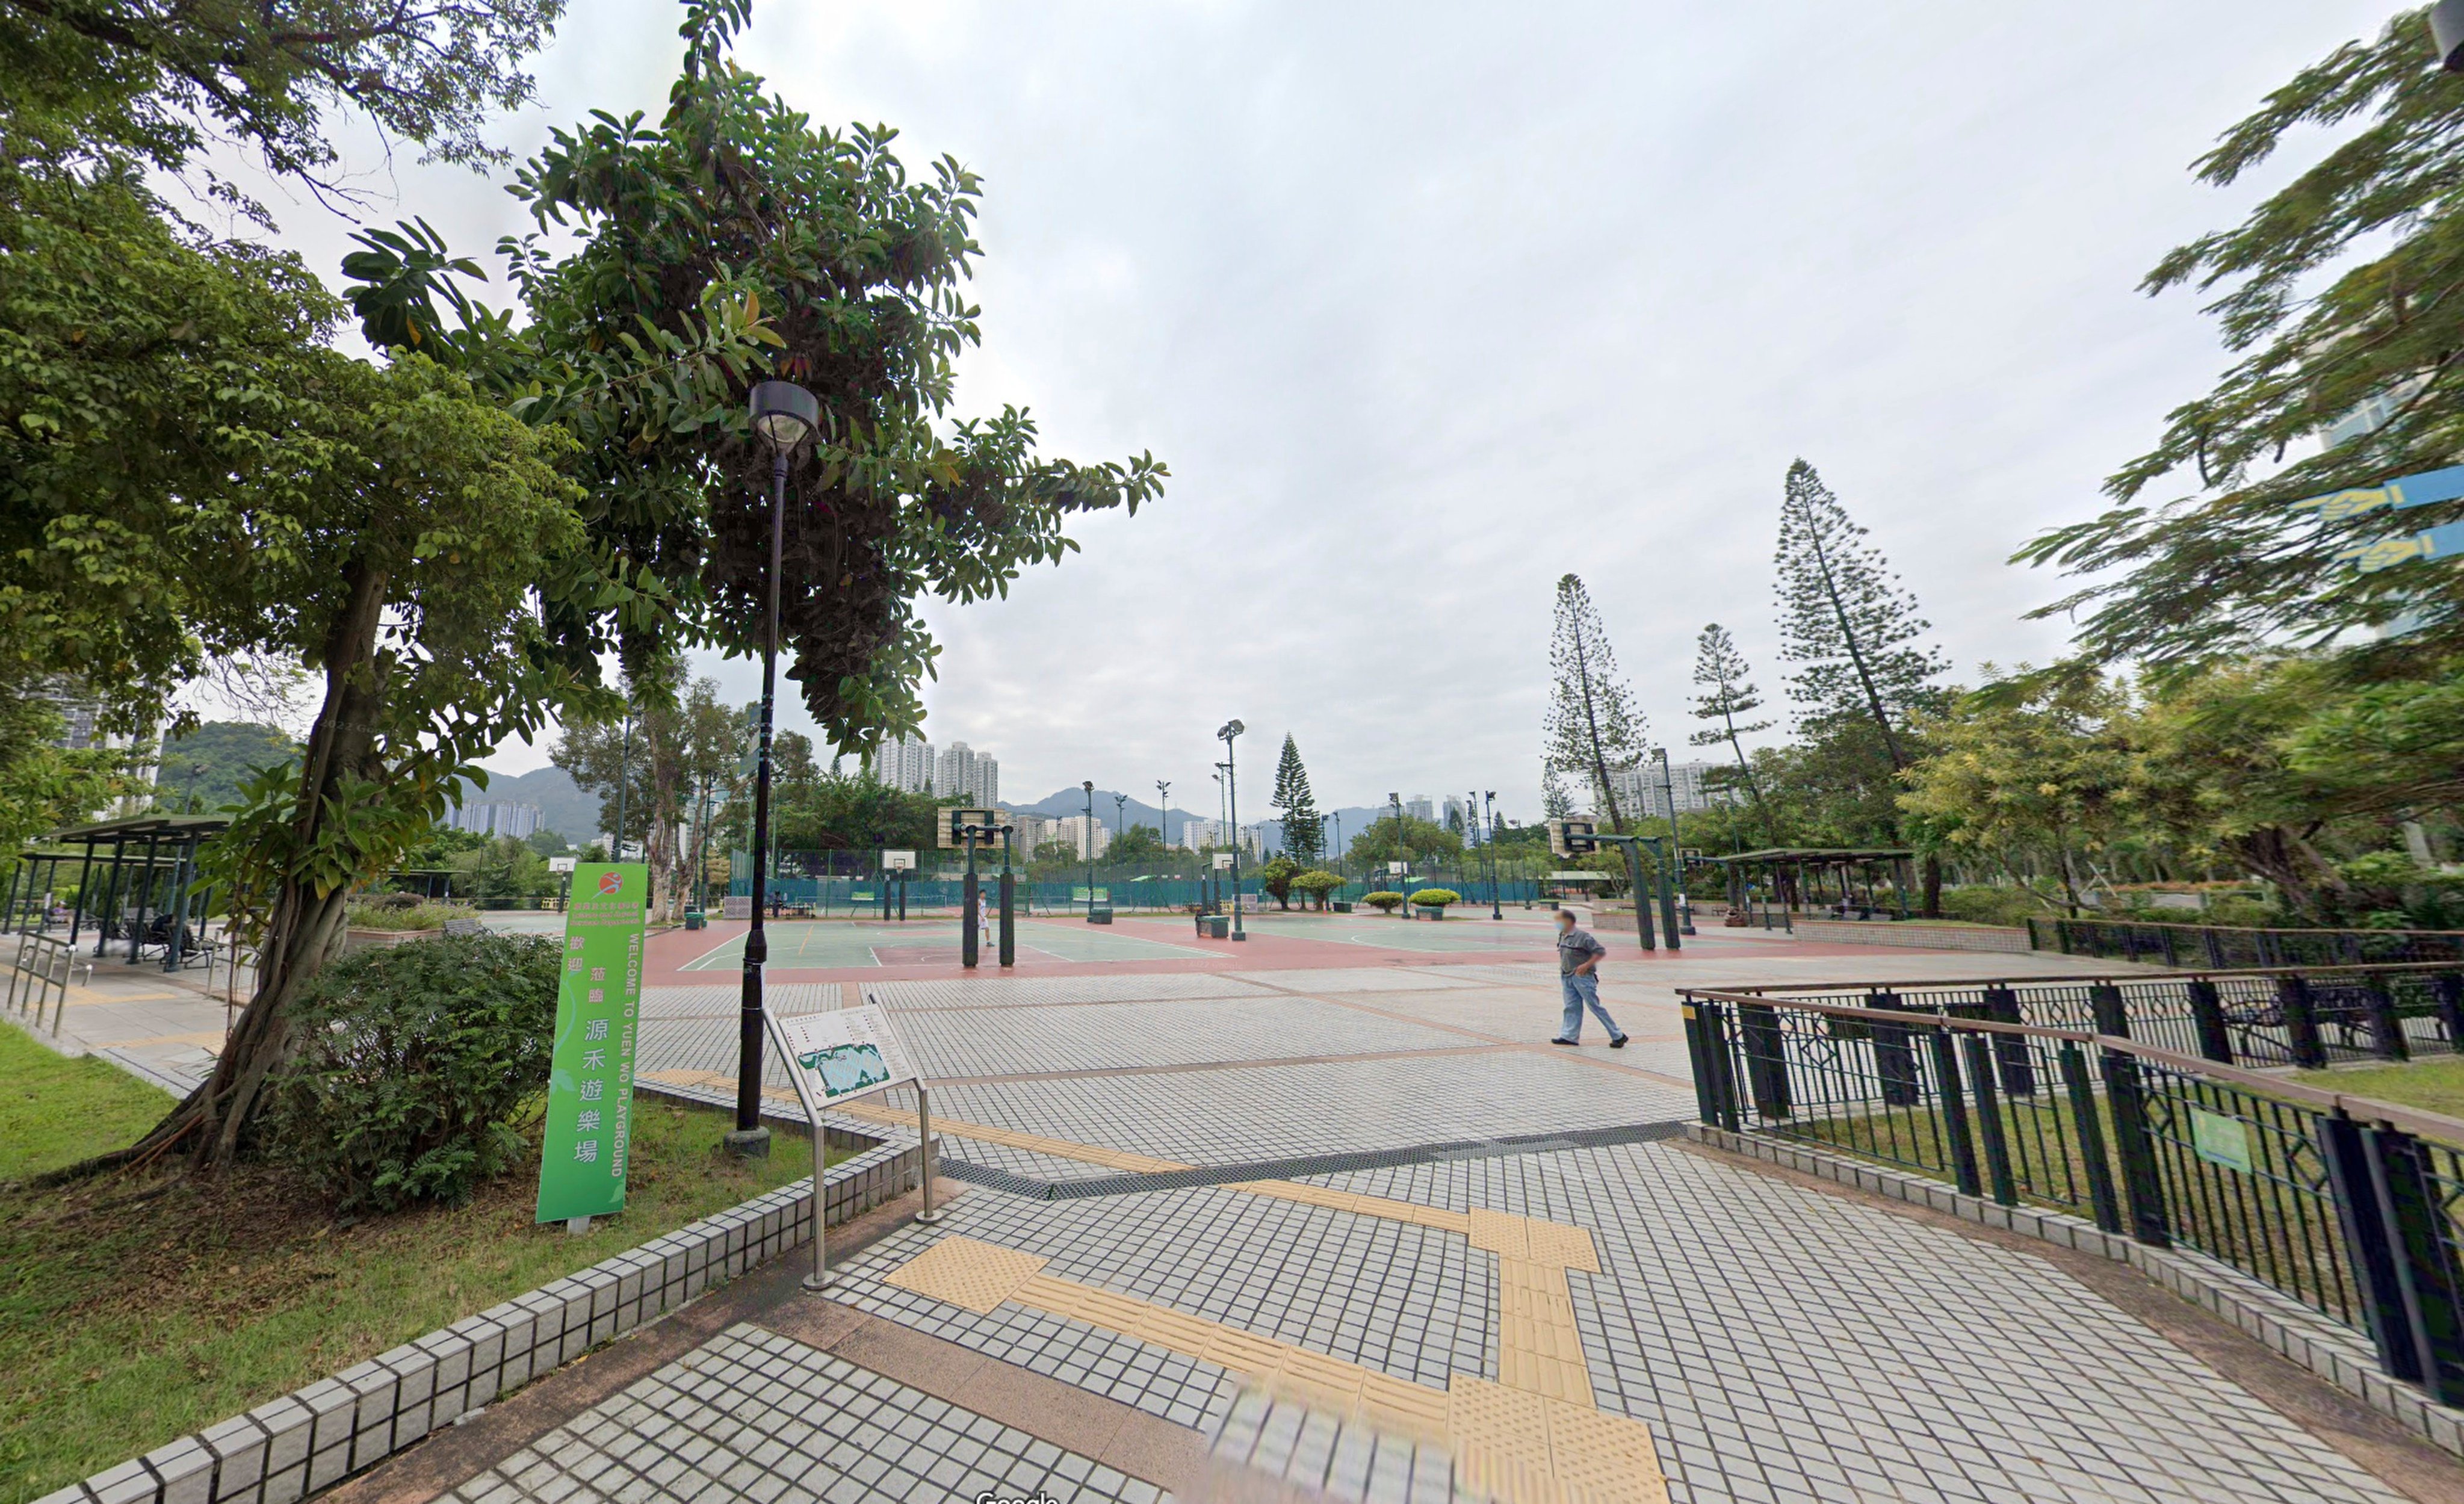 Yuen Wo Playground in Sha Tin, where the workers were cleaning sewage drains. Photo: Google Maps